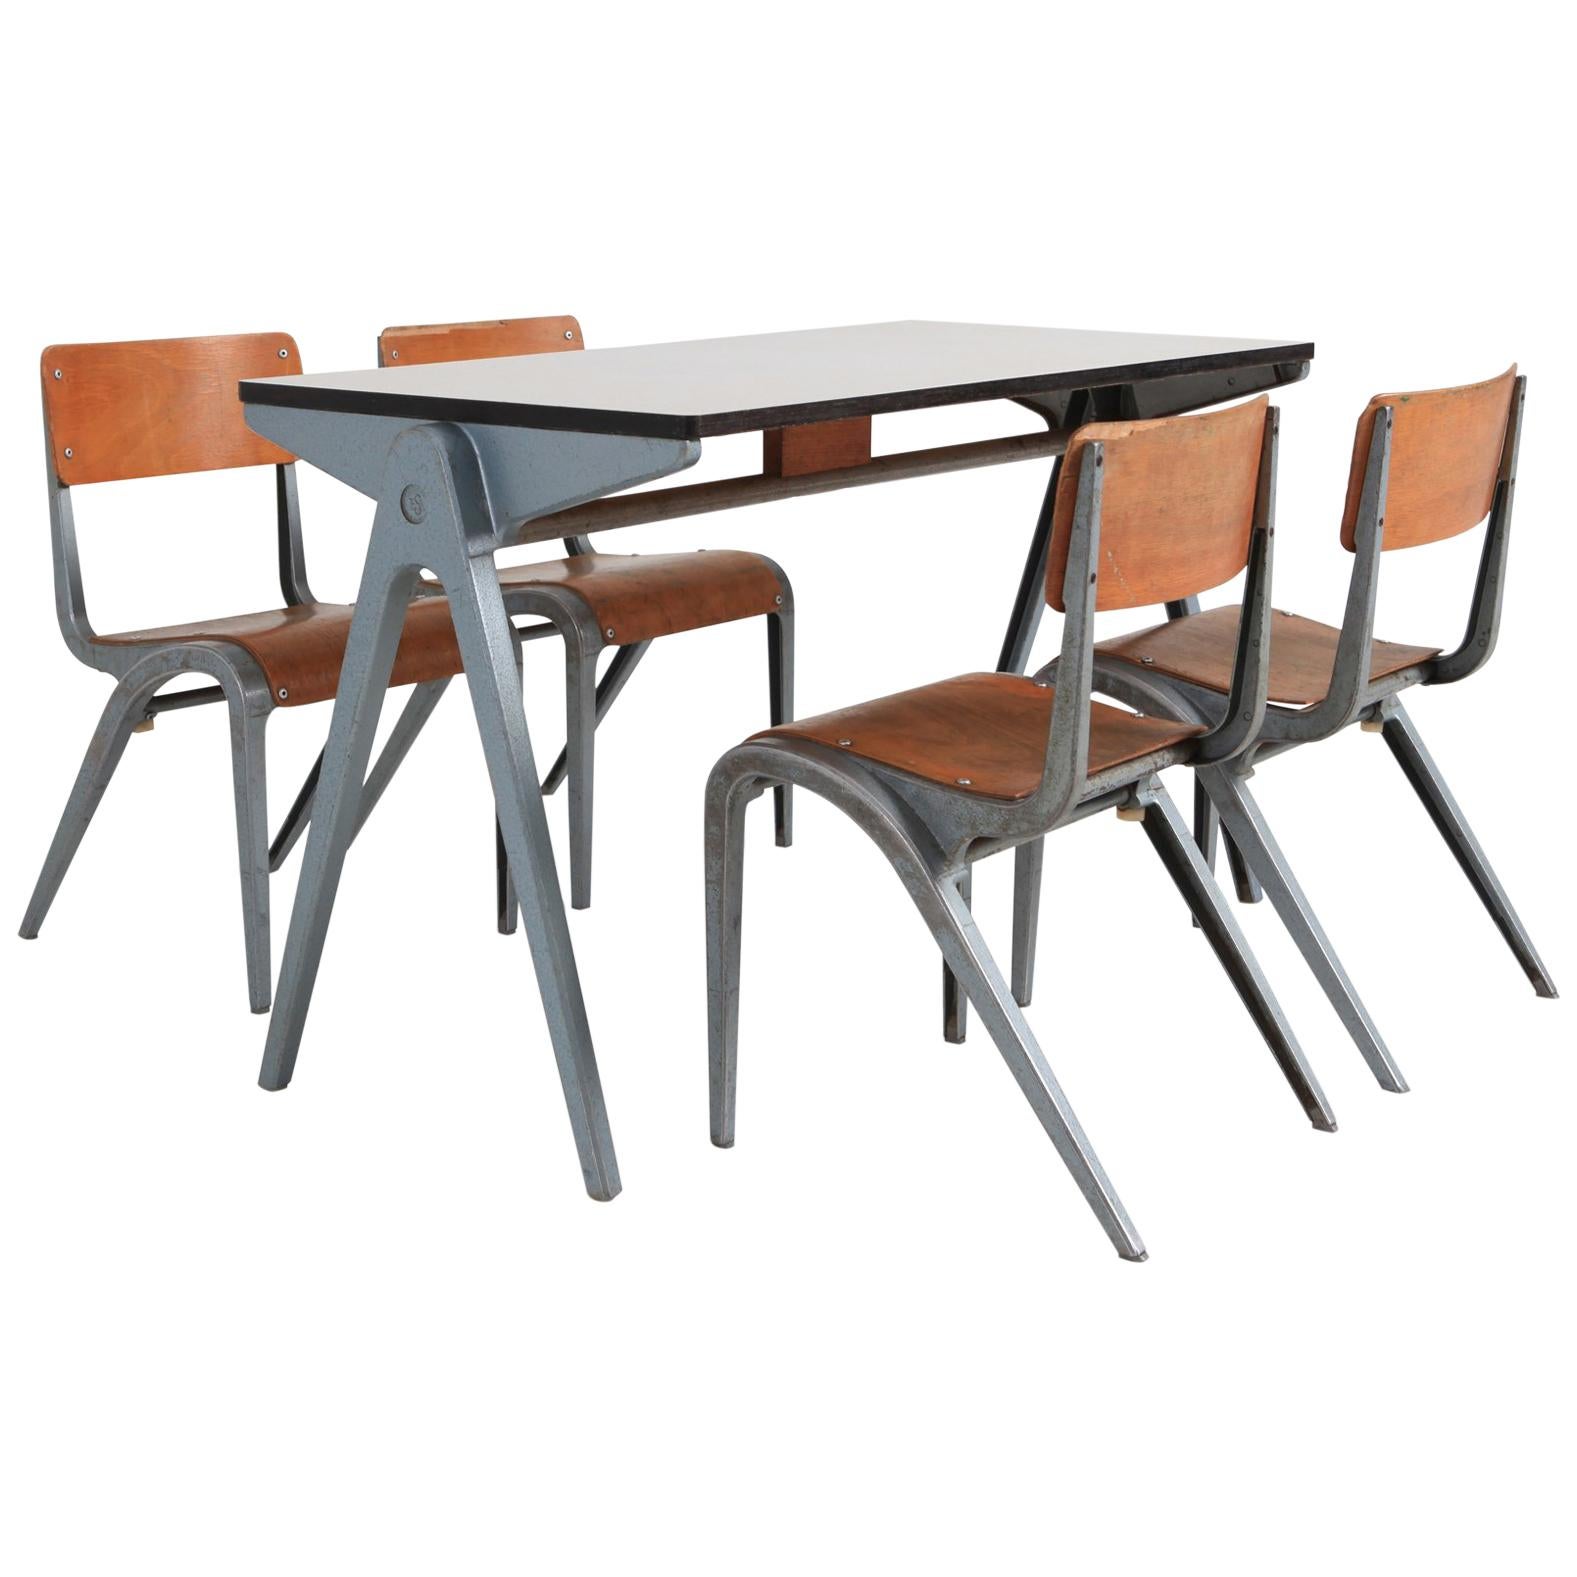 Industrial Writing Desk Table with Chairs for Kids by James Leonard for Esavian